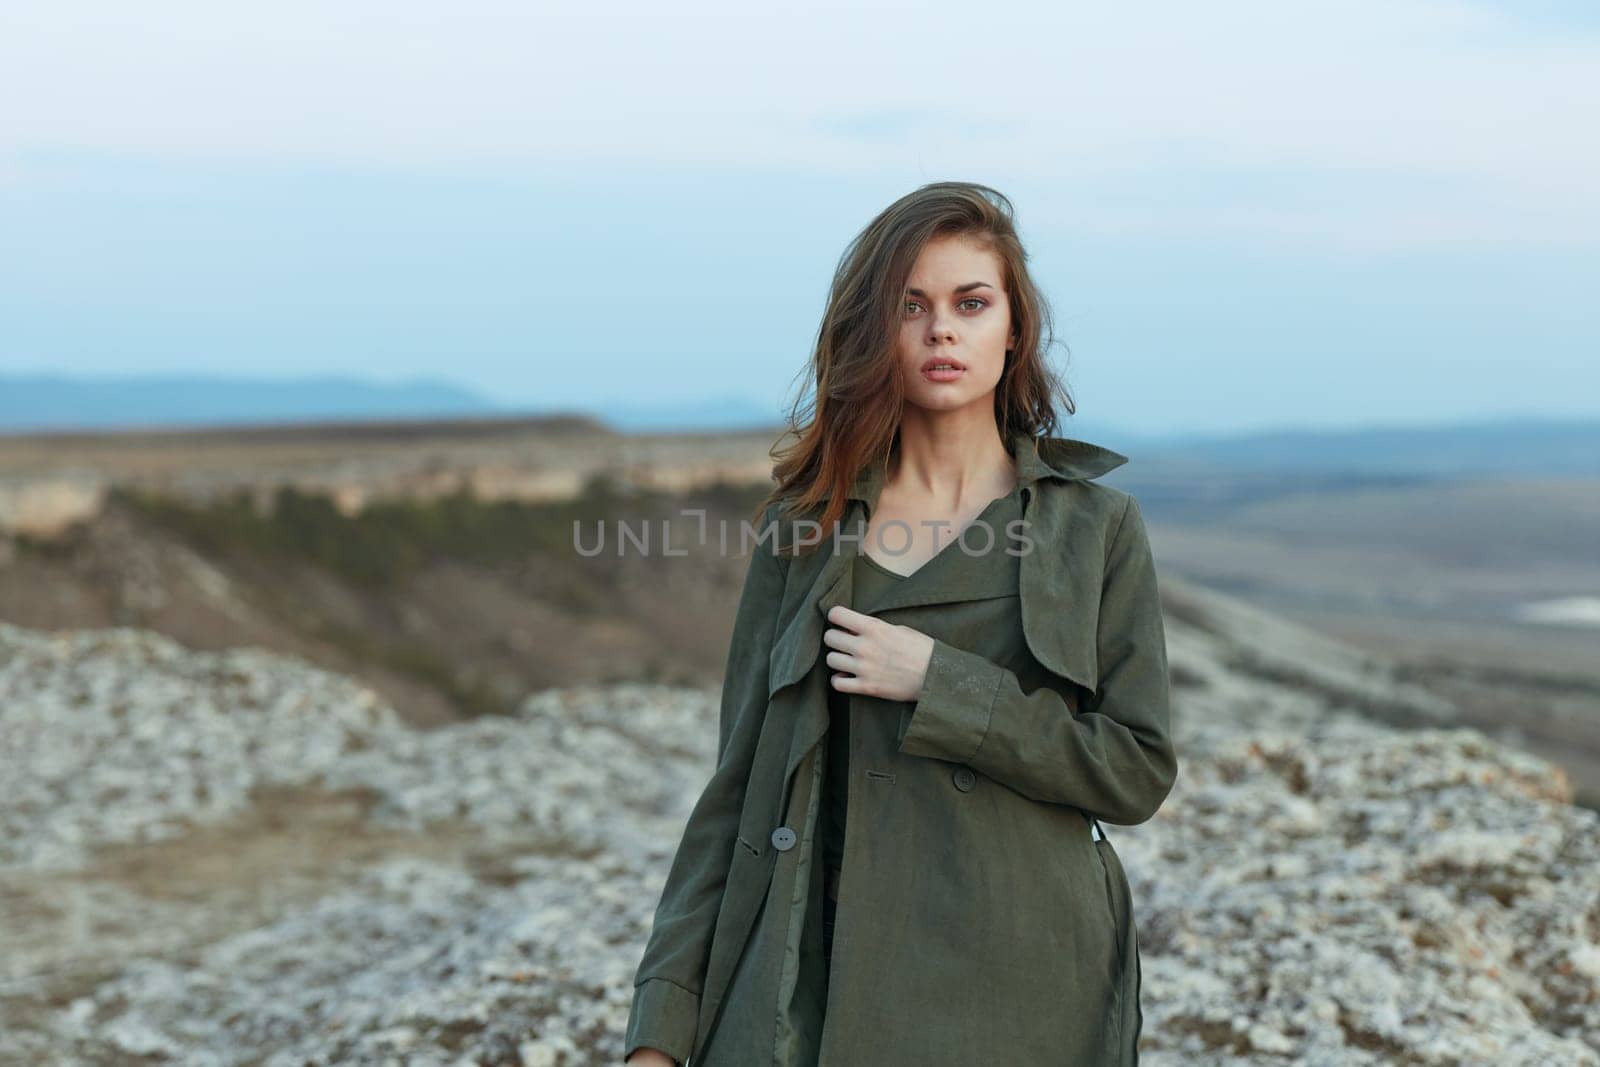 Woman in olive trench coat stands on hill overlooking vast ocean expanse by Vichizh